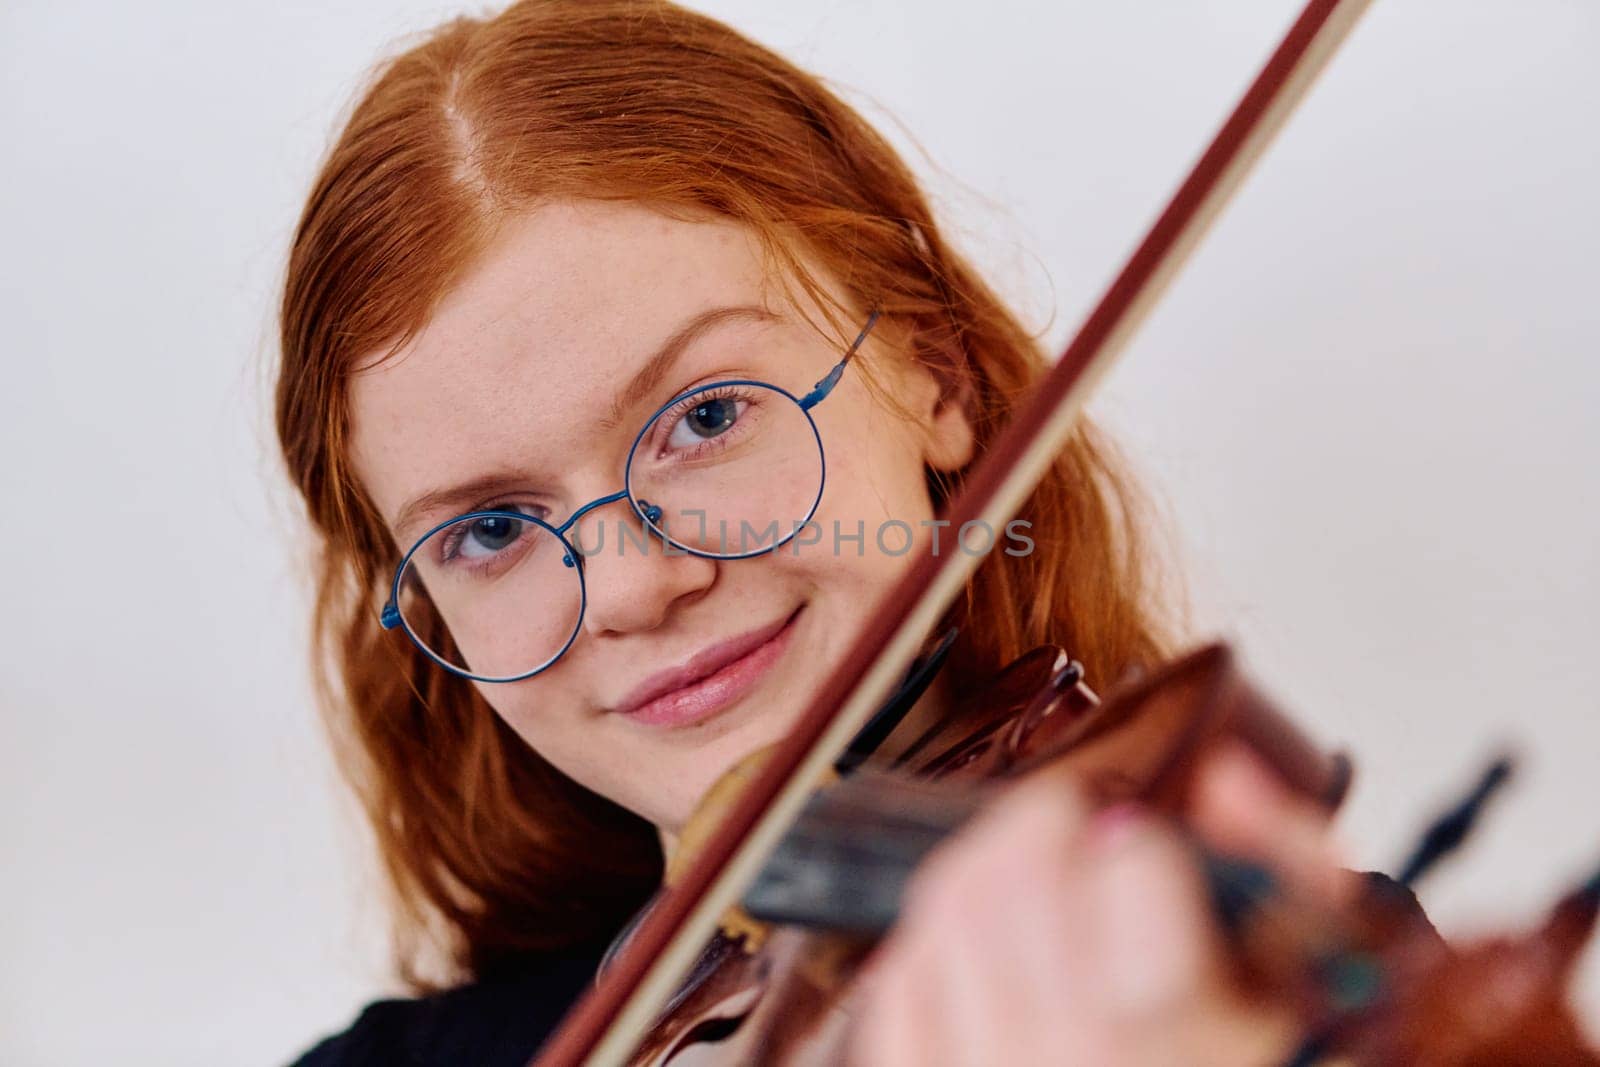 Stunning Redhead Musician Poses with Violin in Captivating Portrait by dotshock